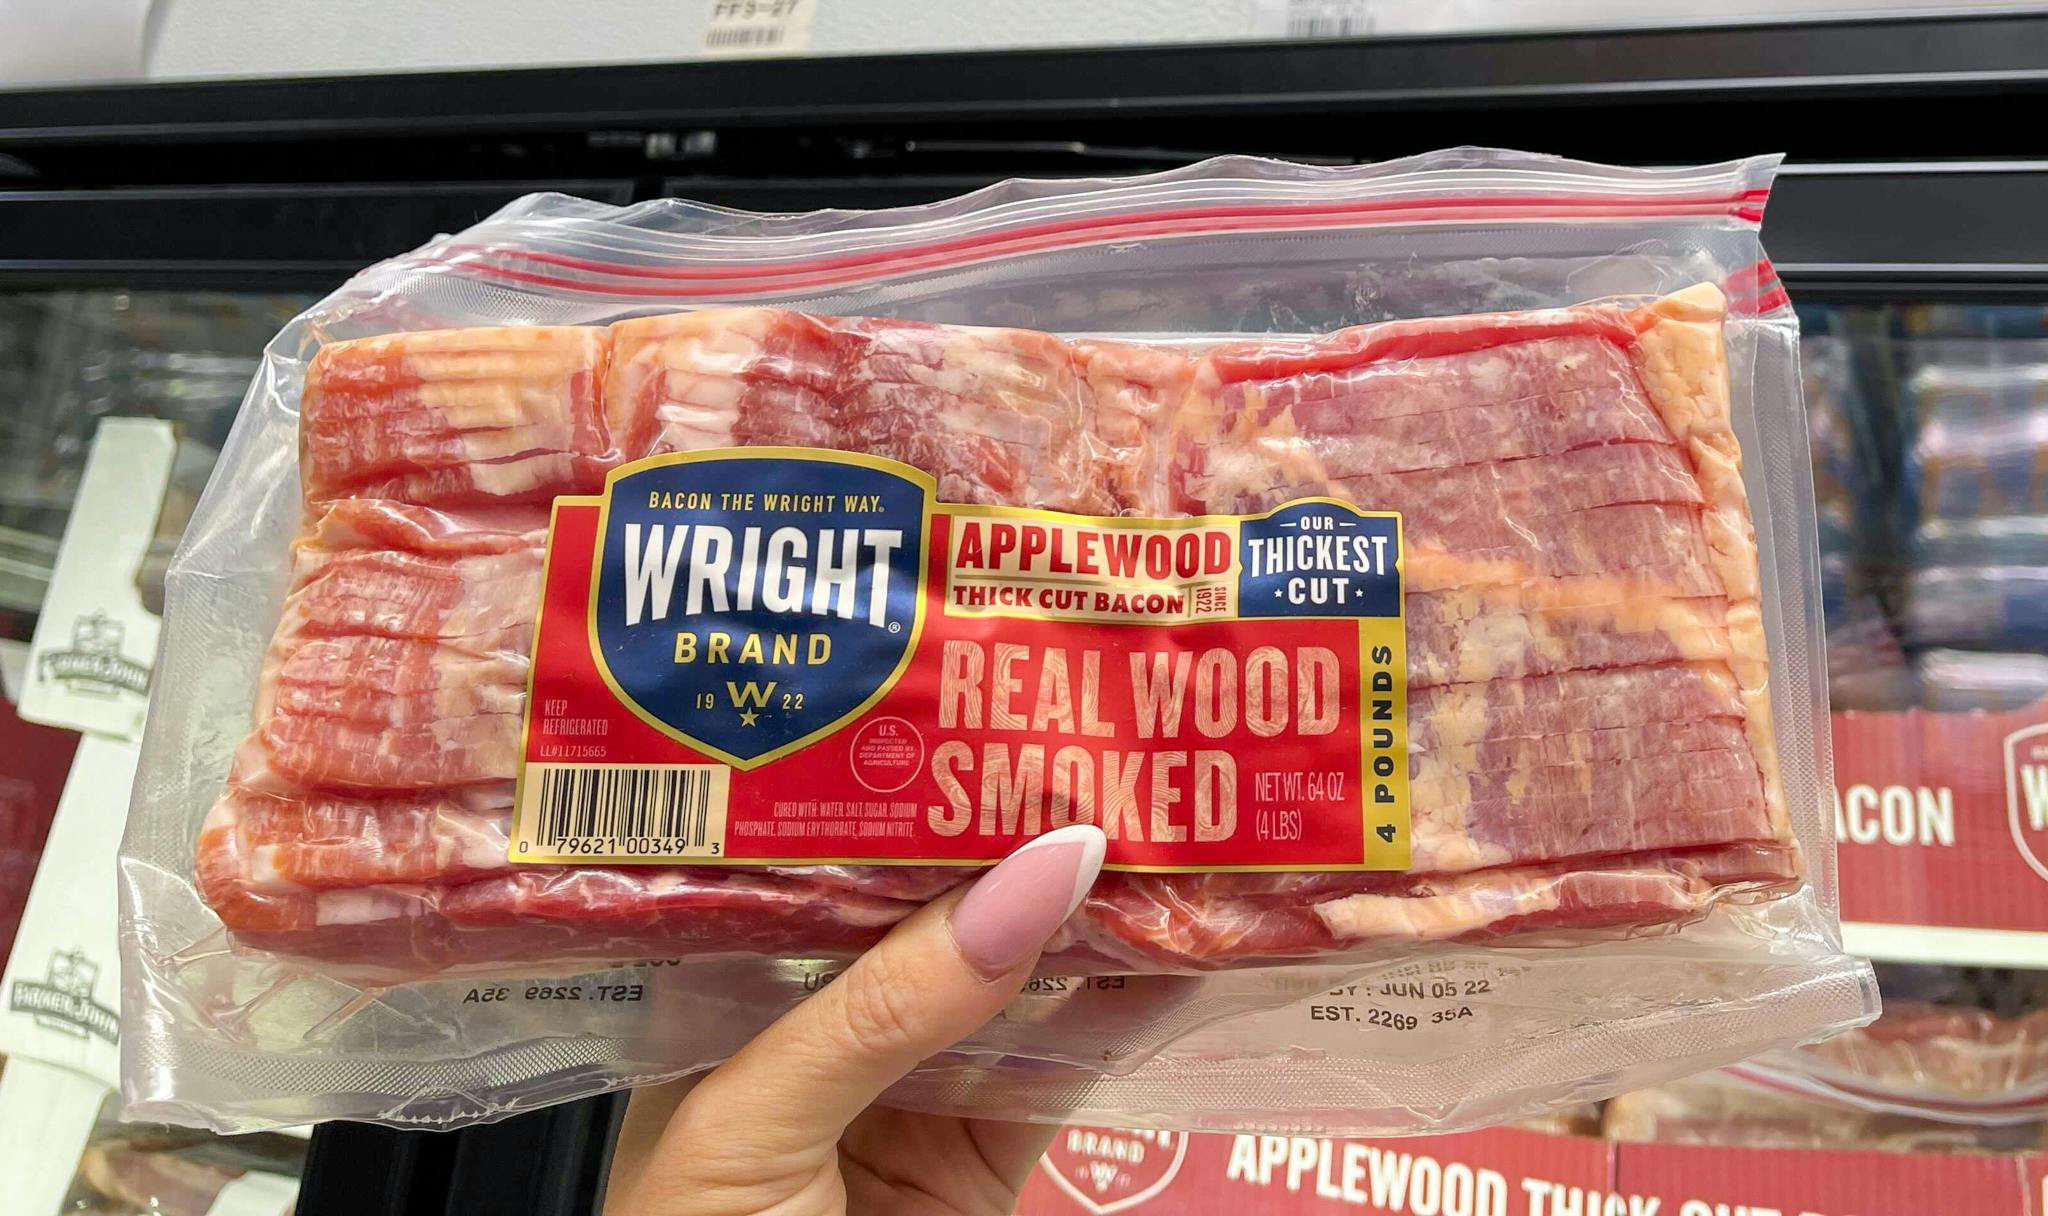 A person's hand holding up a package of Wright Brand real wood smoked bacon in the refrigerated section at Sam's Club.